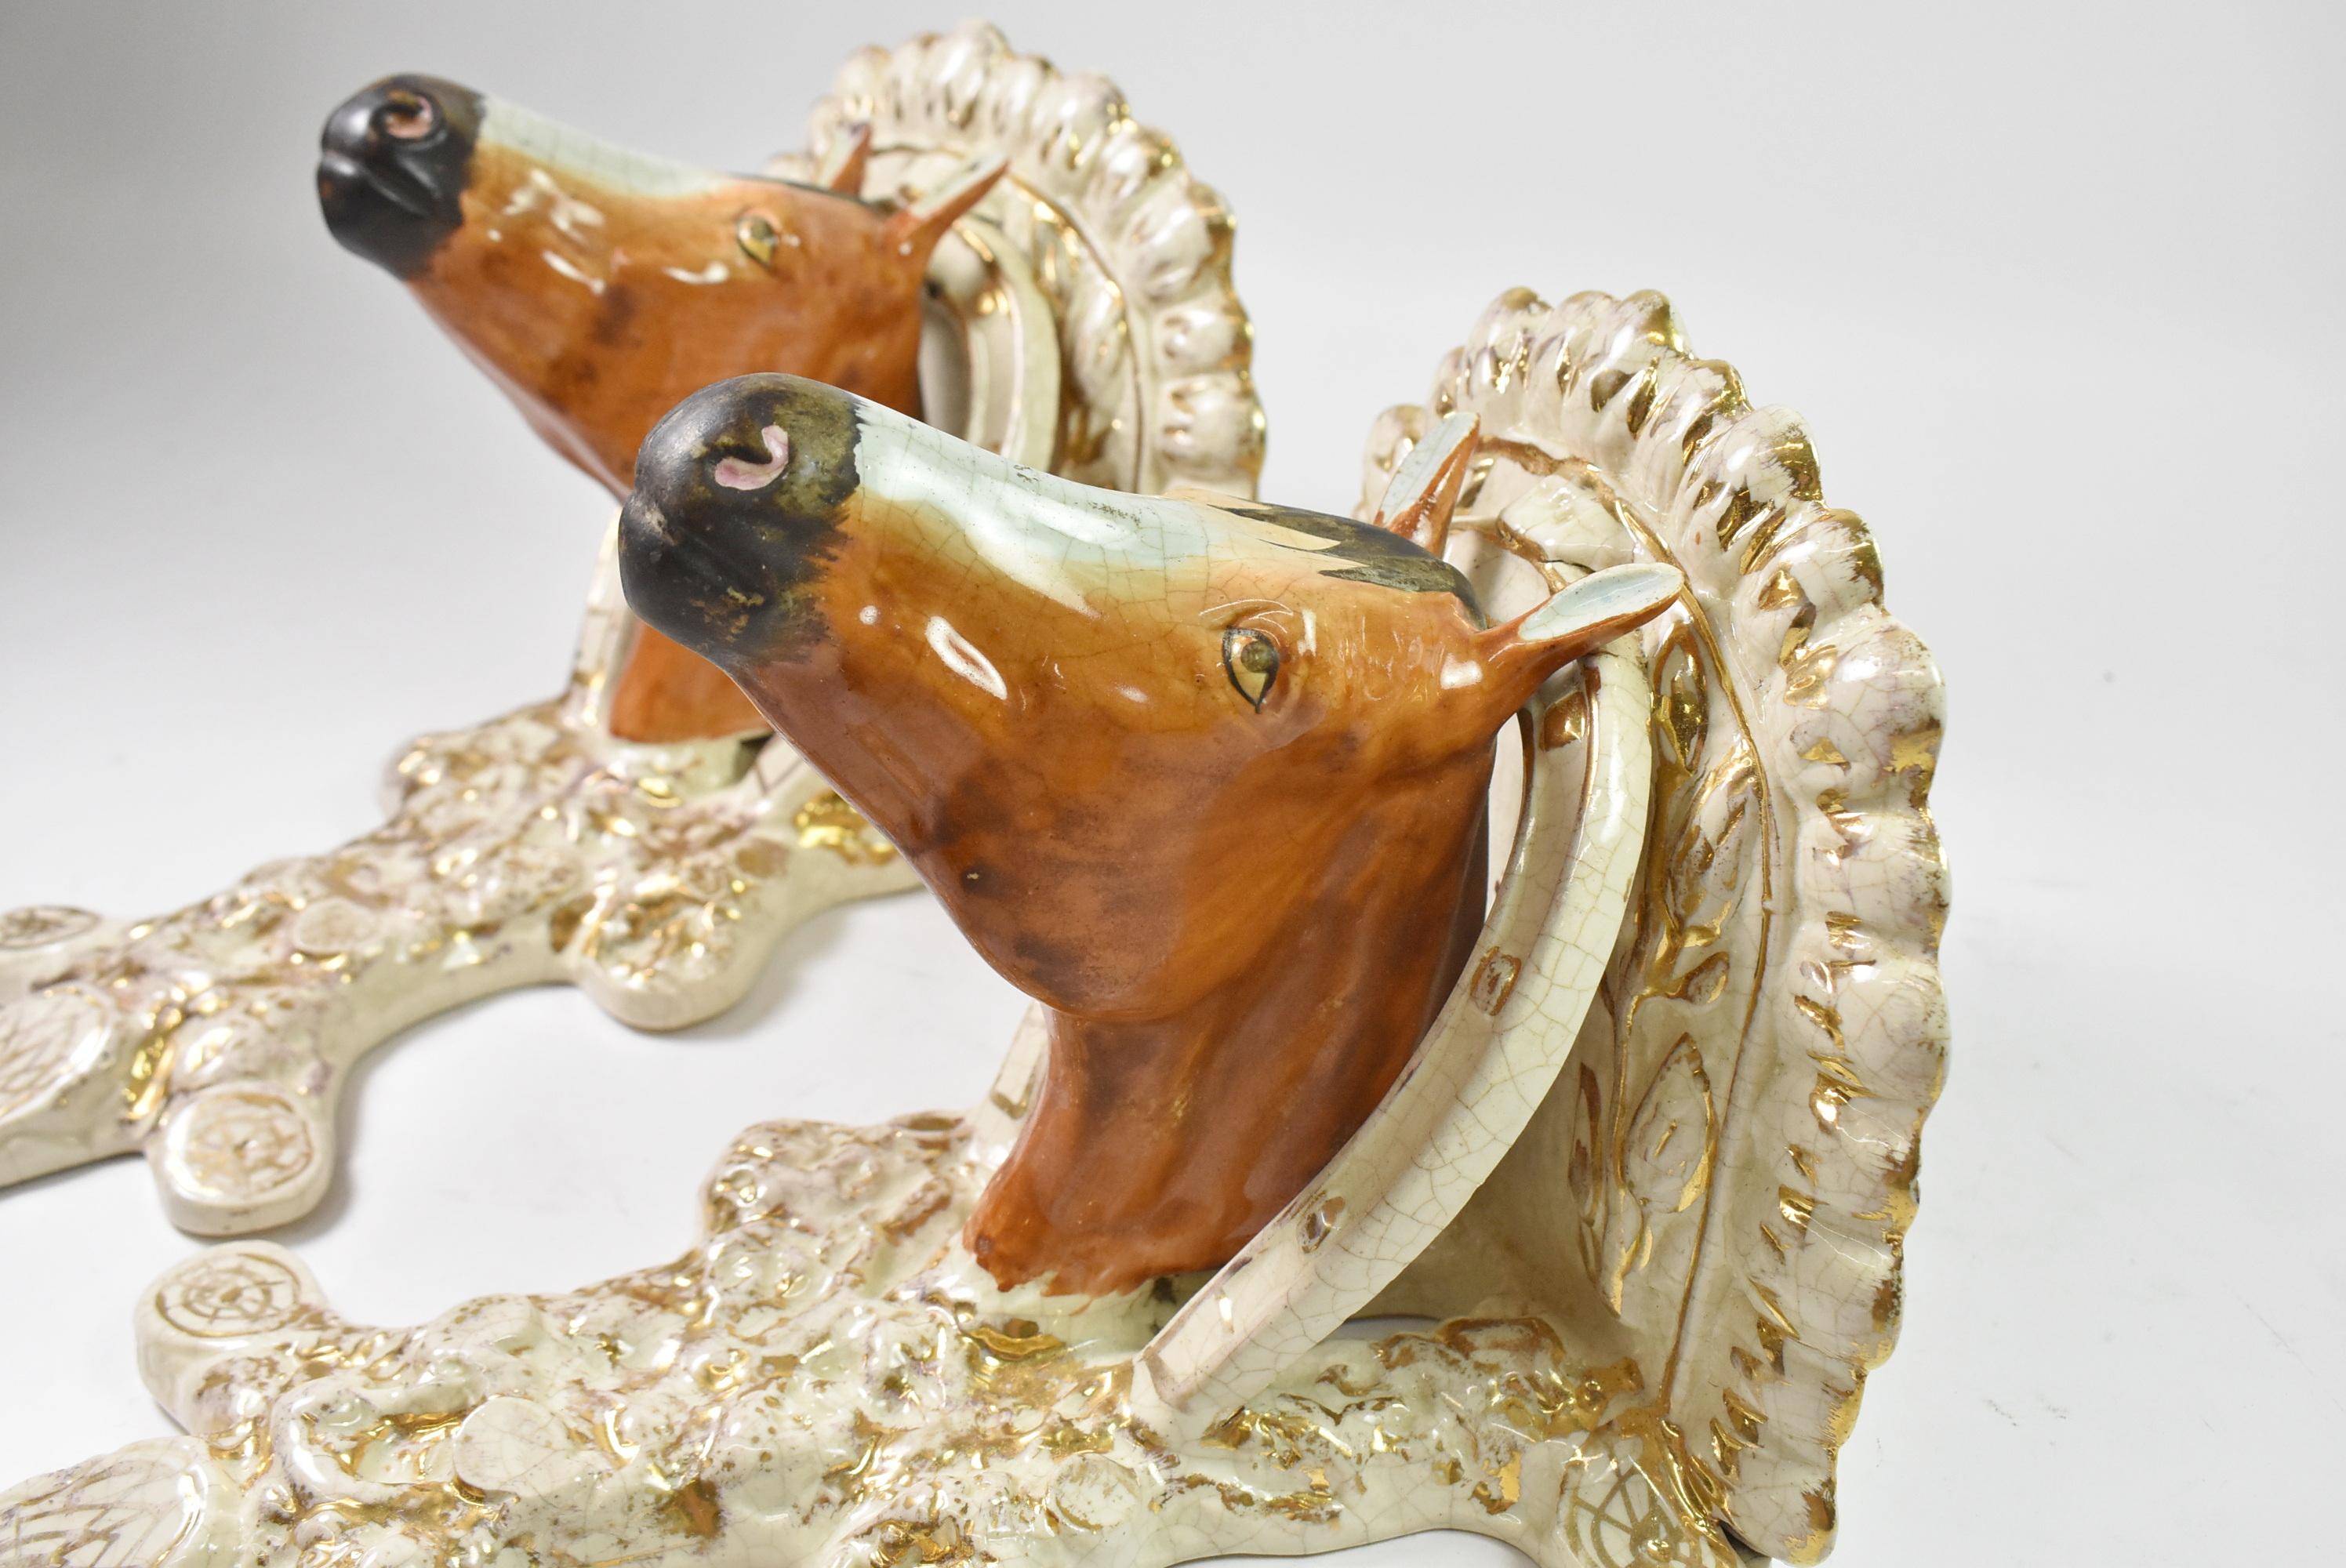 Pair of English Staffordshire horse sconces or wall shelves. Circa 1870, 19th century. Molded forms. Features horse painting lifelike colors. General crazing, minor fritting, as photo'd. Horsehead with horseshoe in cream color with glided